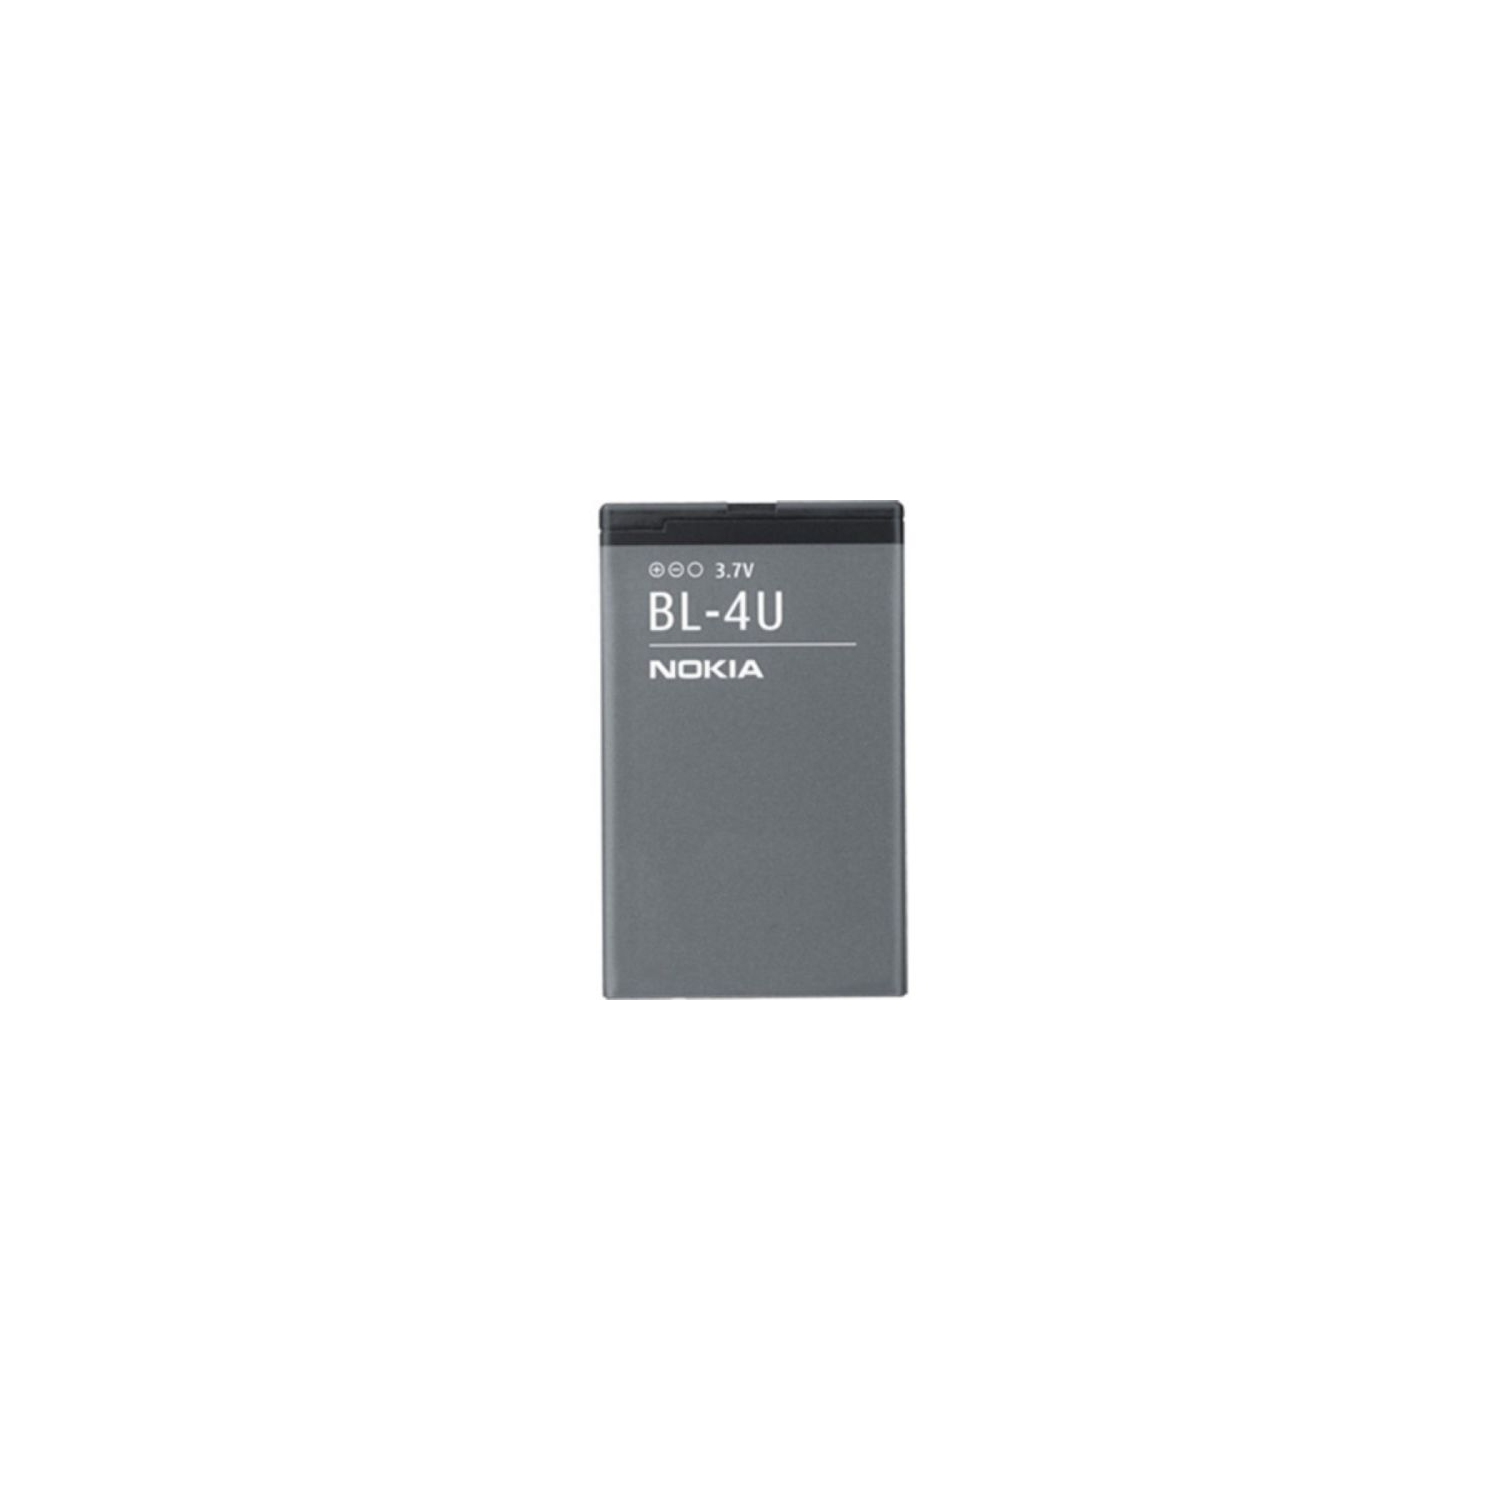 BL-4U Replacement Battery for Nokia E66 E75 3120C 5530 5730 6212 6600 8800 N500